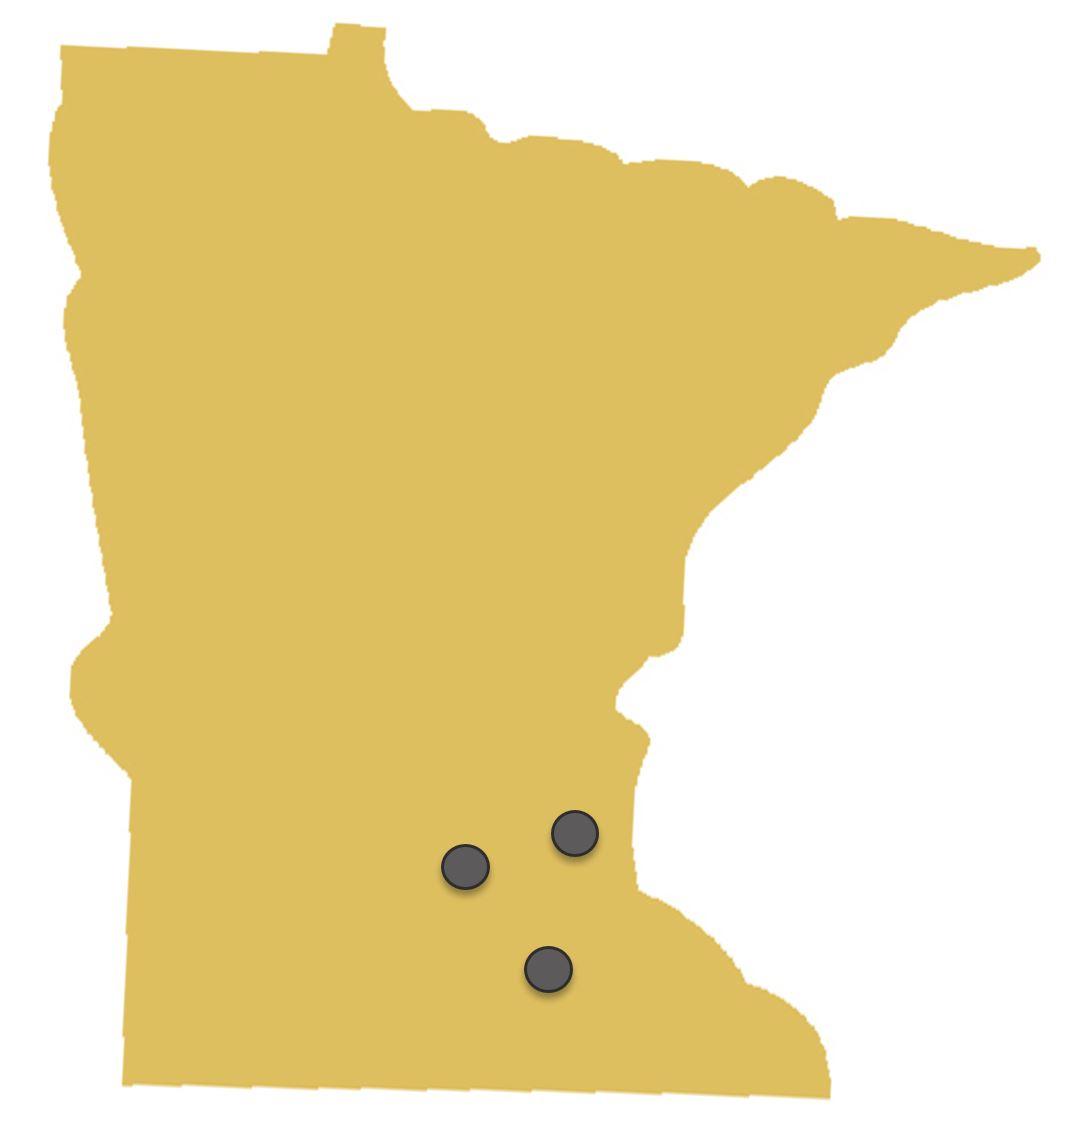 Location of sidedressing experiments in Minnesota